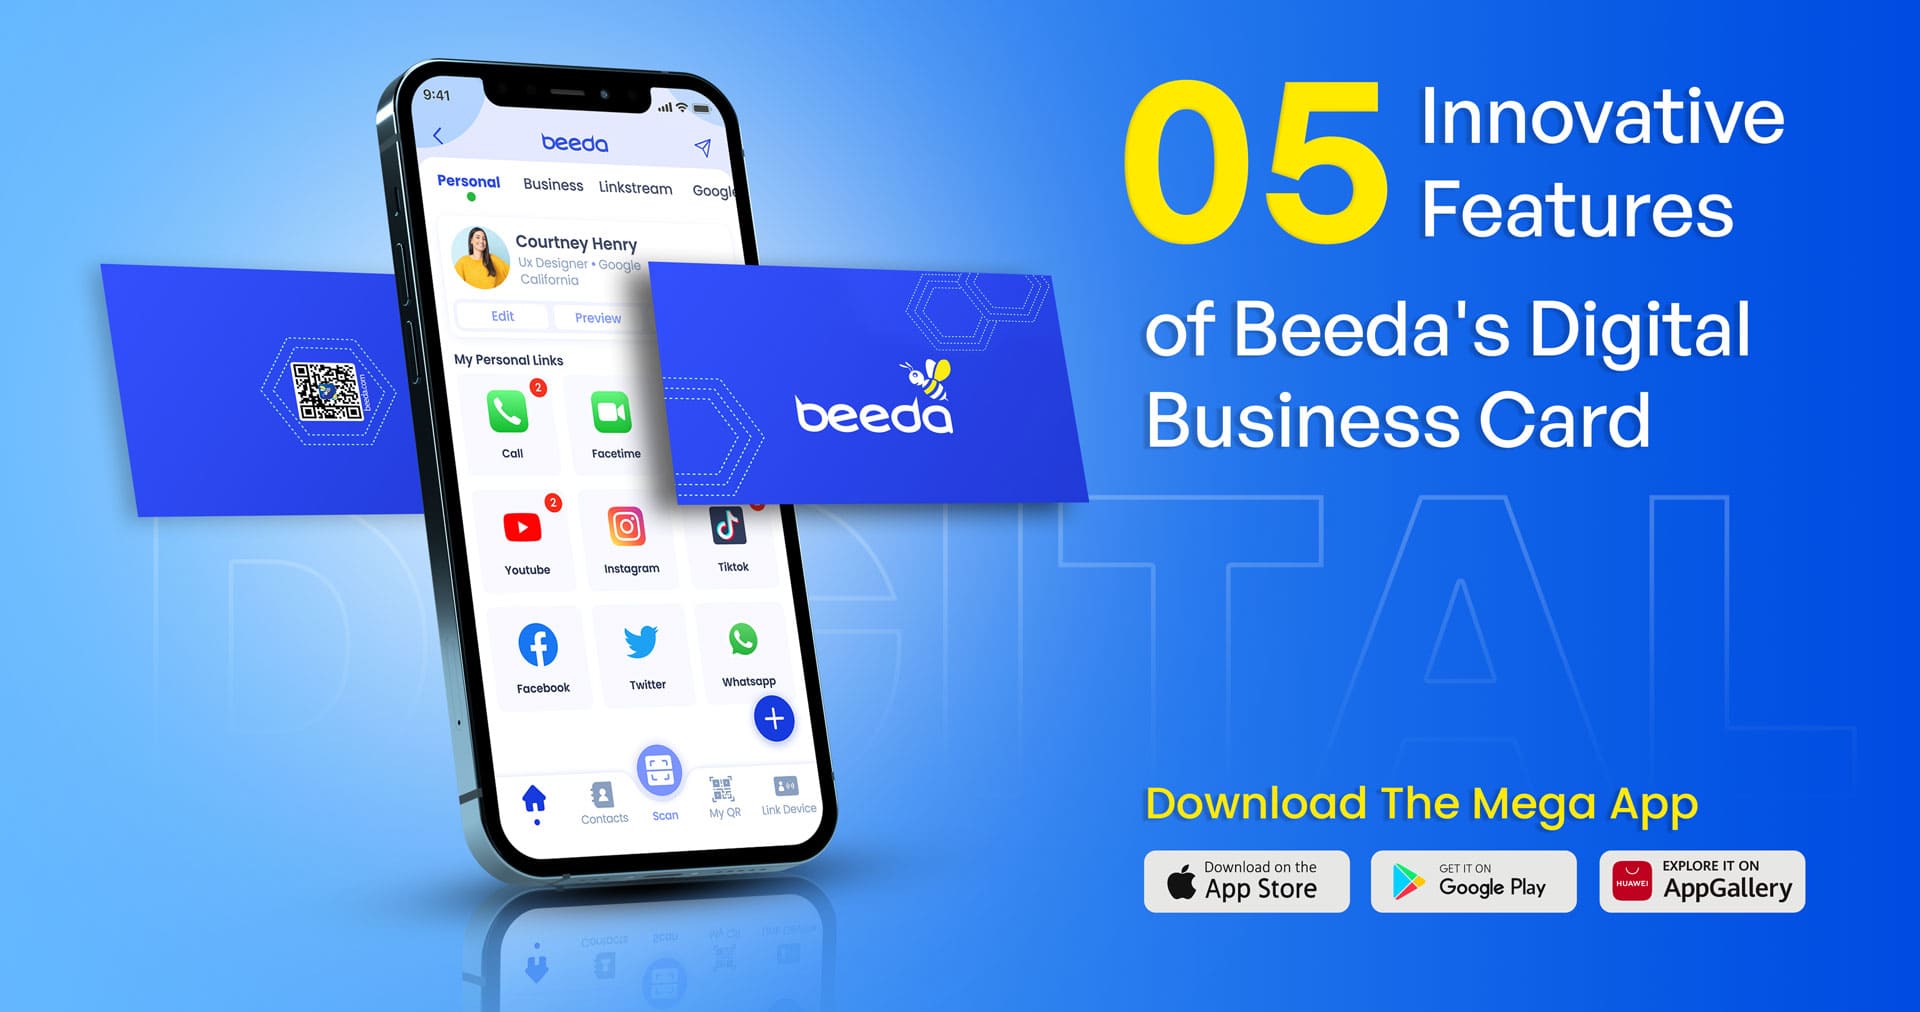 Innovative Features of Beeda's Digital Business Card